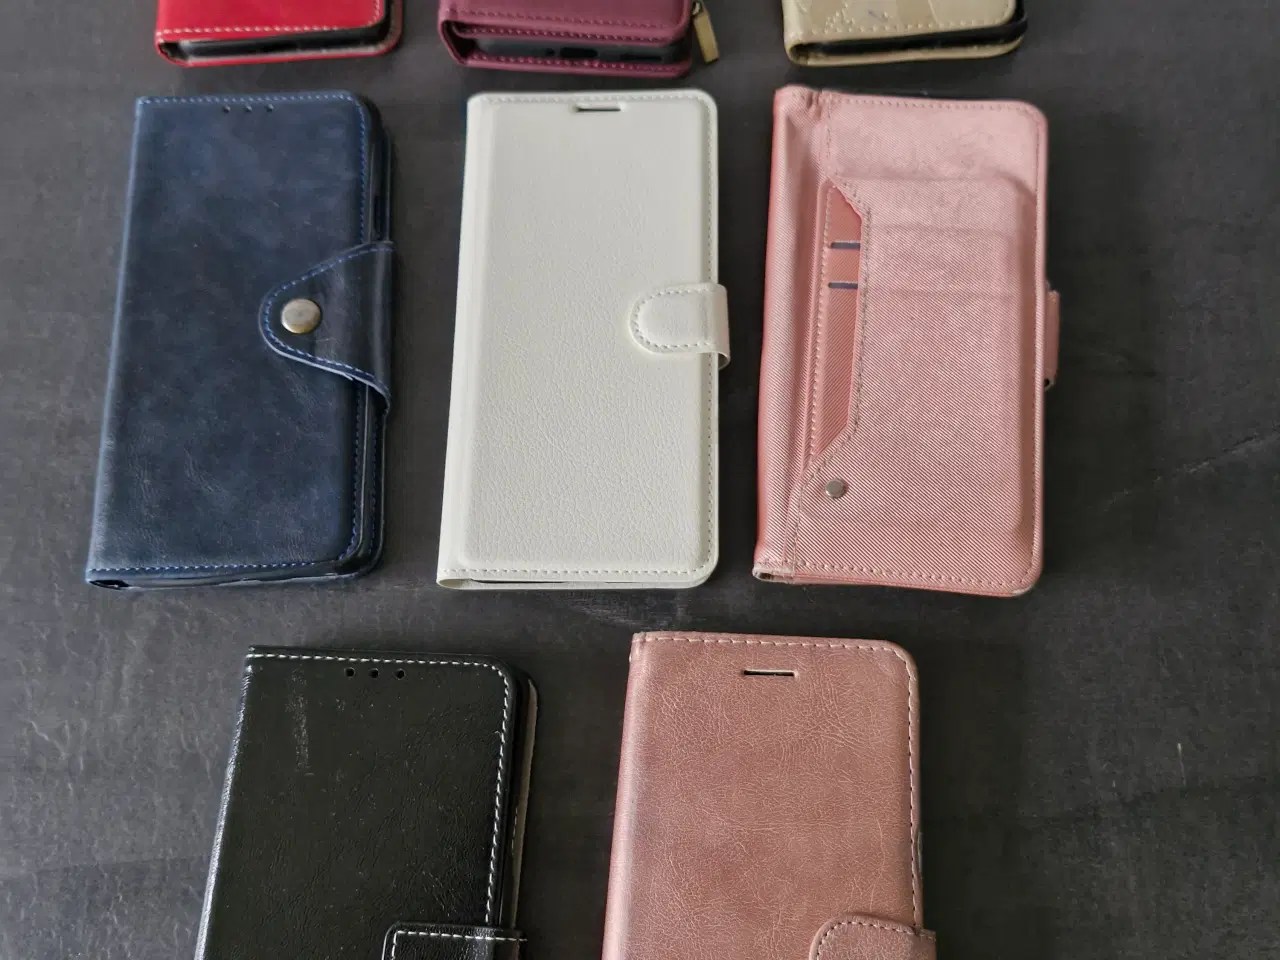 Billede 1 - Covers oneplus 8 pro